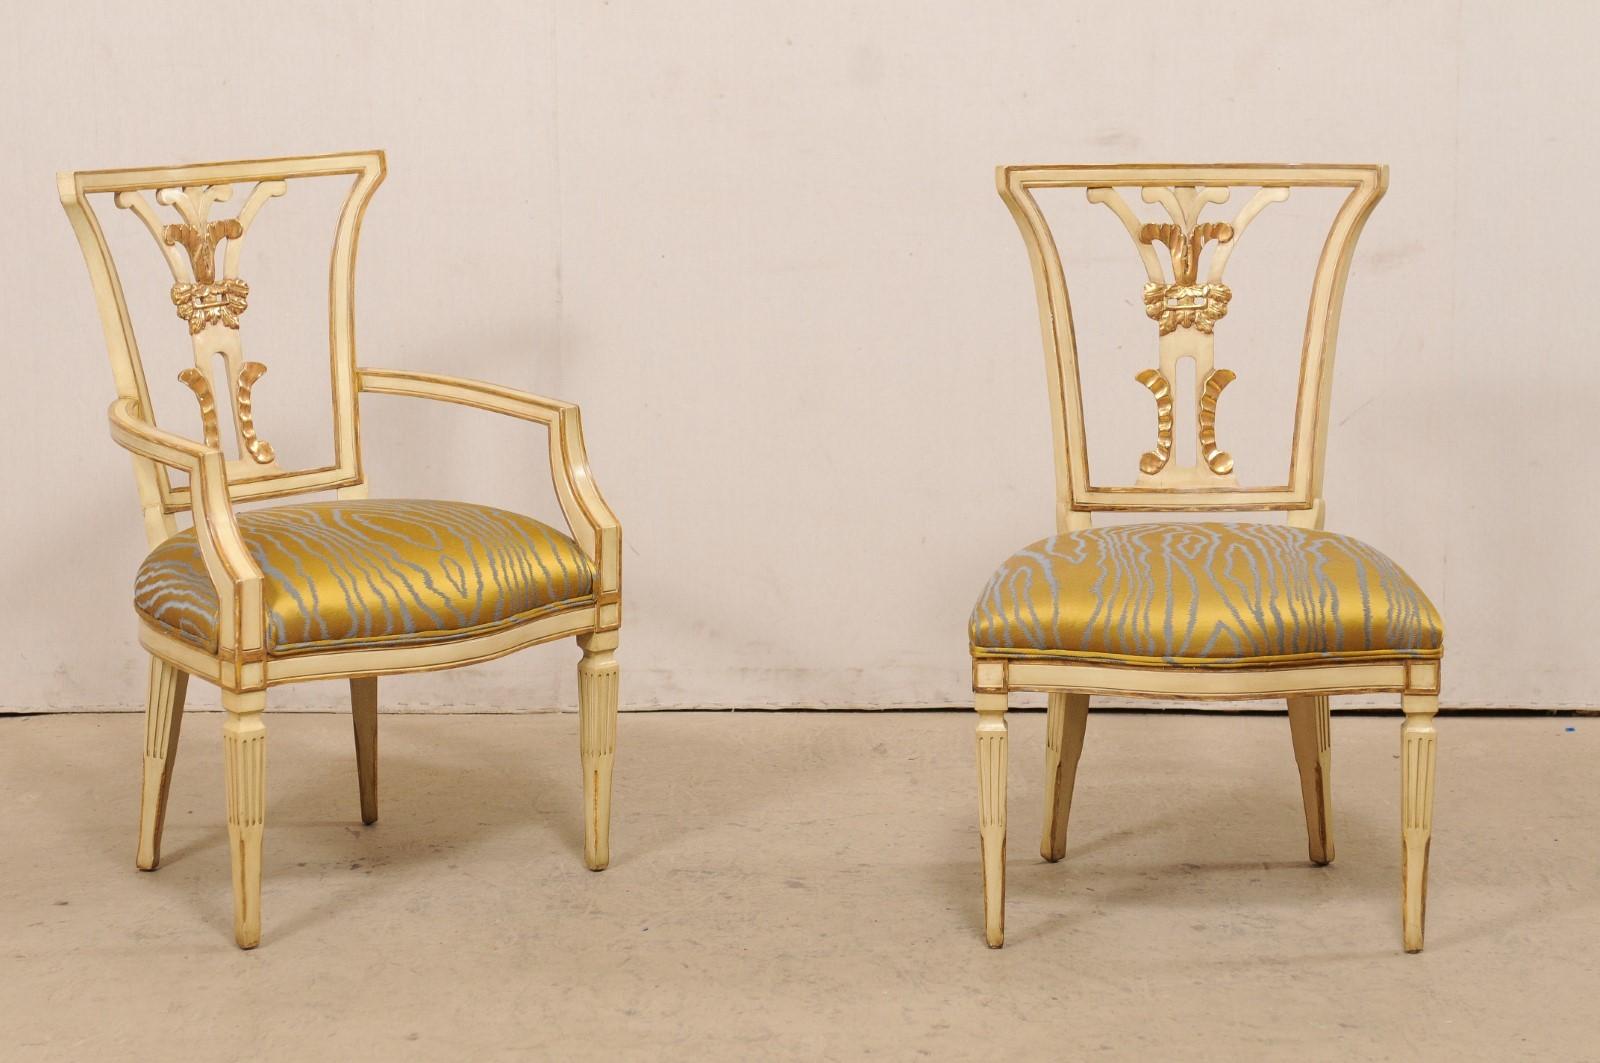 Neoclassical Italian Set of Ten Dining Chairs W/ Front and Backs Carved & W/Original Gilt